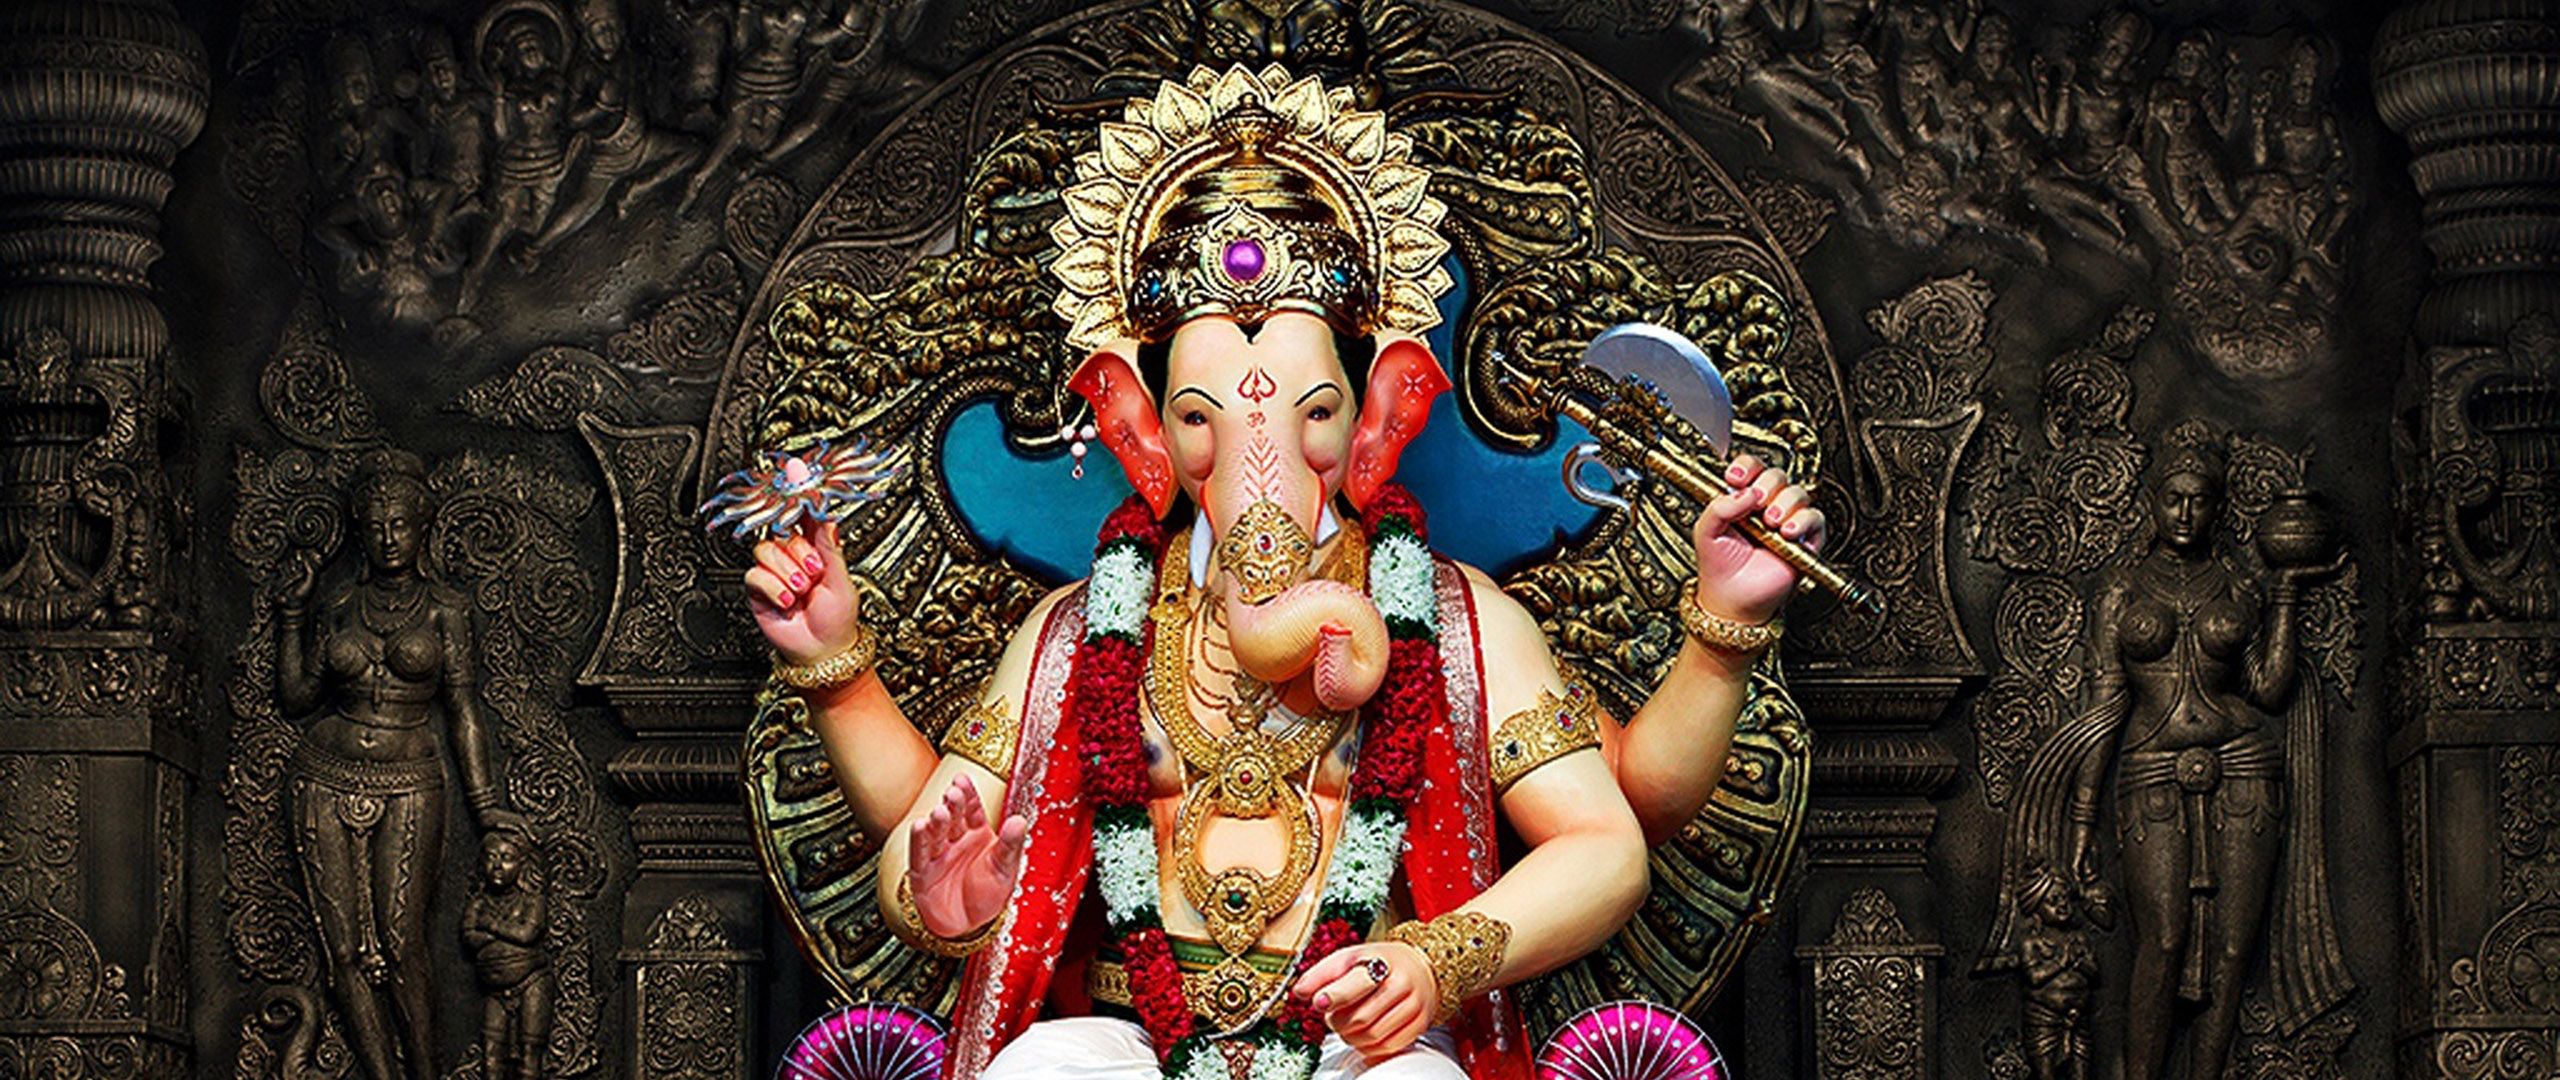 ganesha hd wallpapers for pc